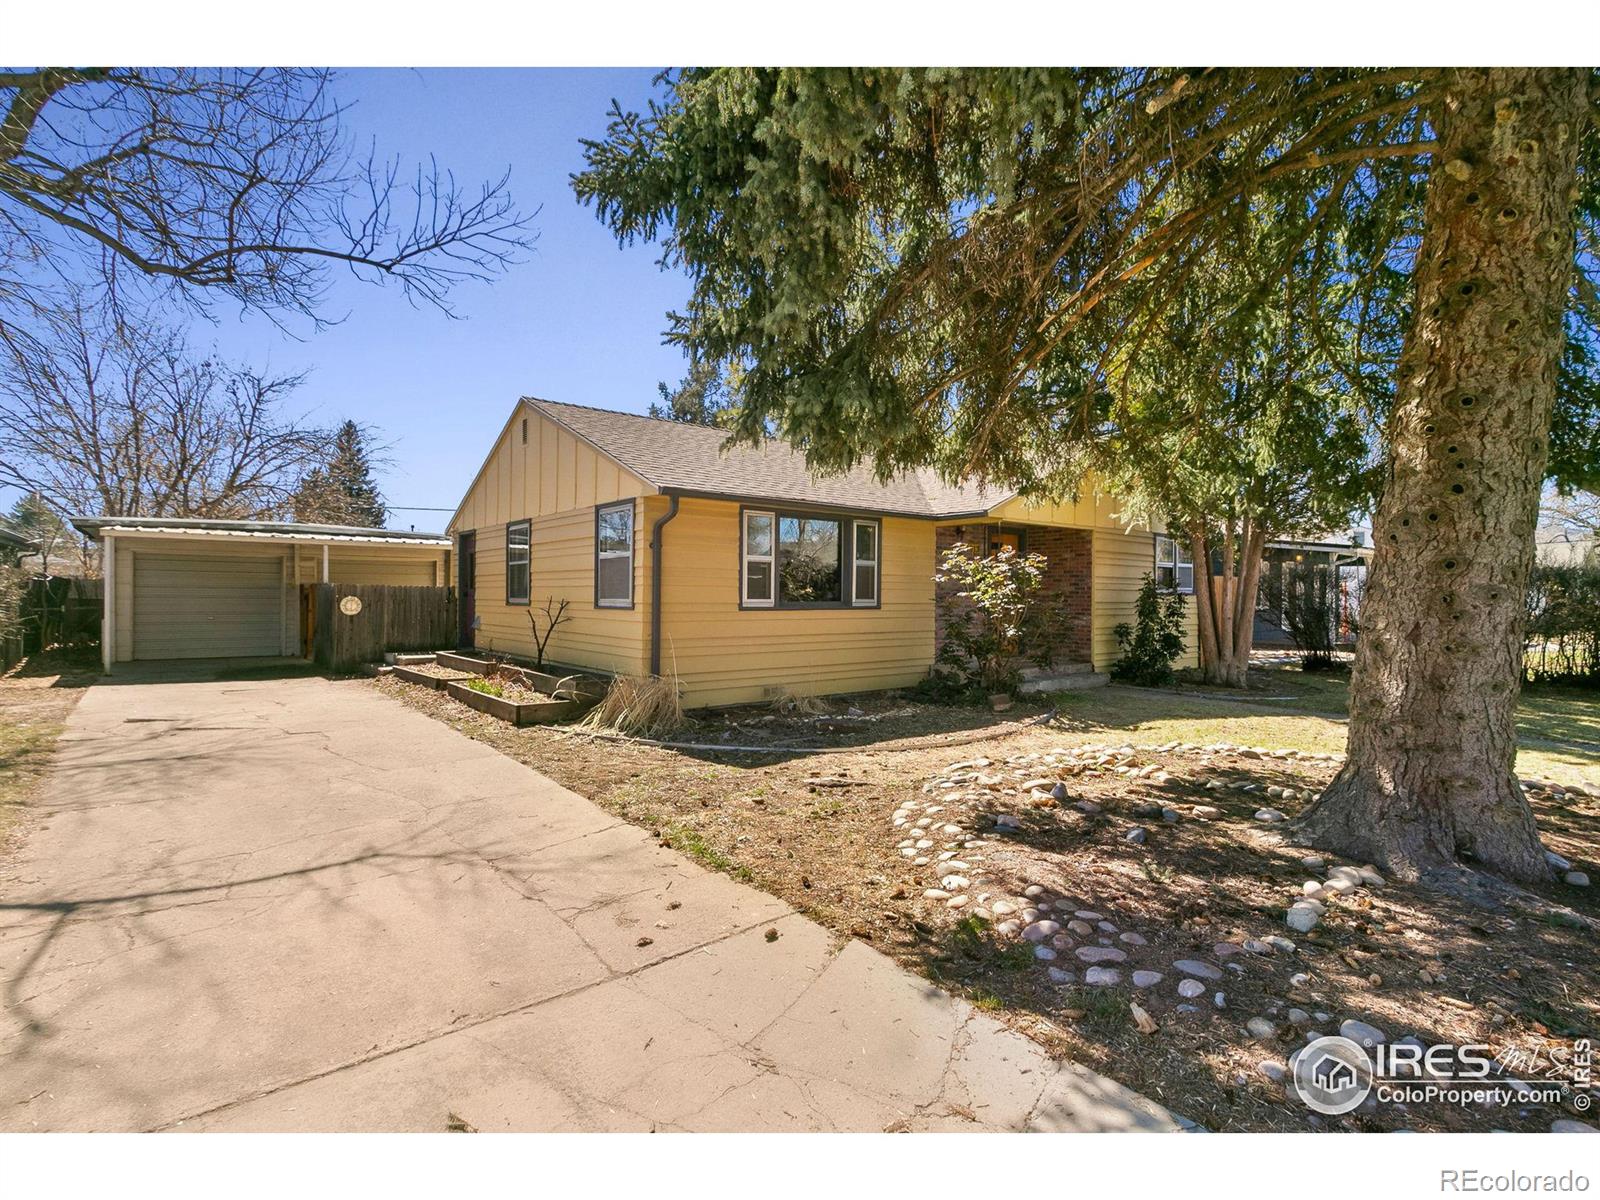 Report Image for 1313 W Myrtle Street,Fort Collins, Colorado